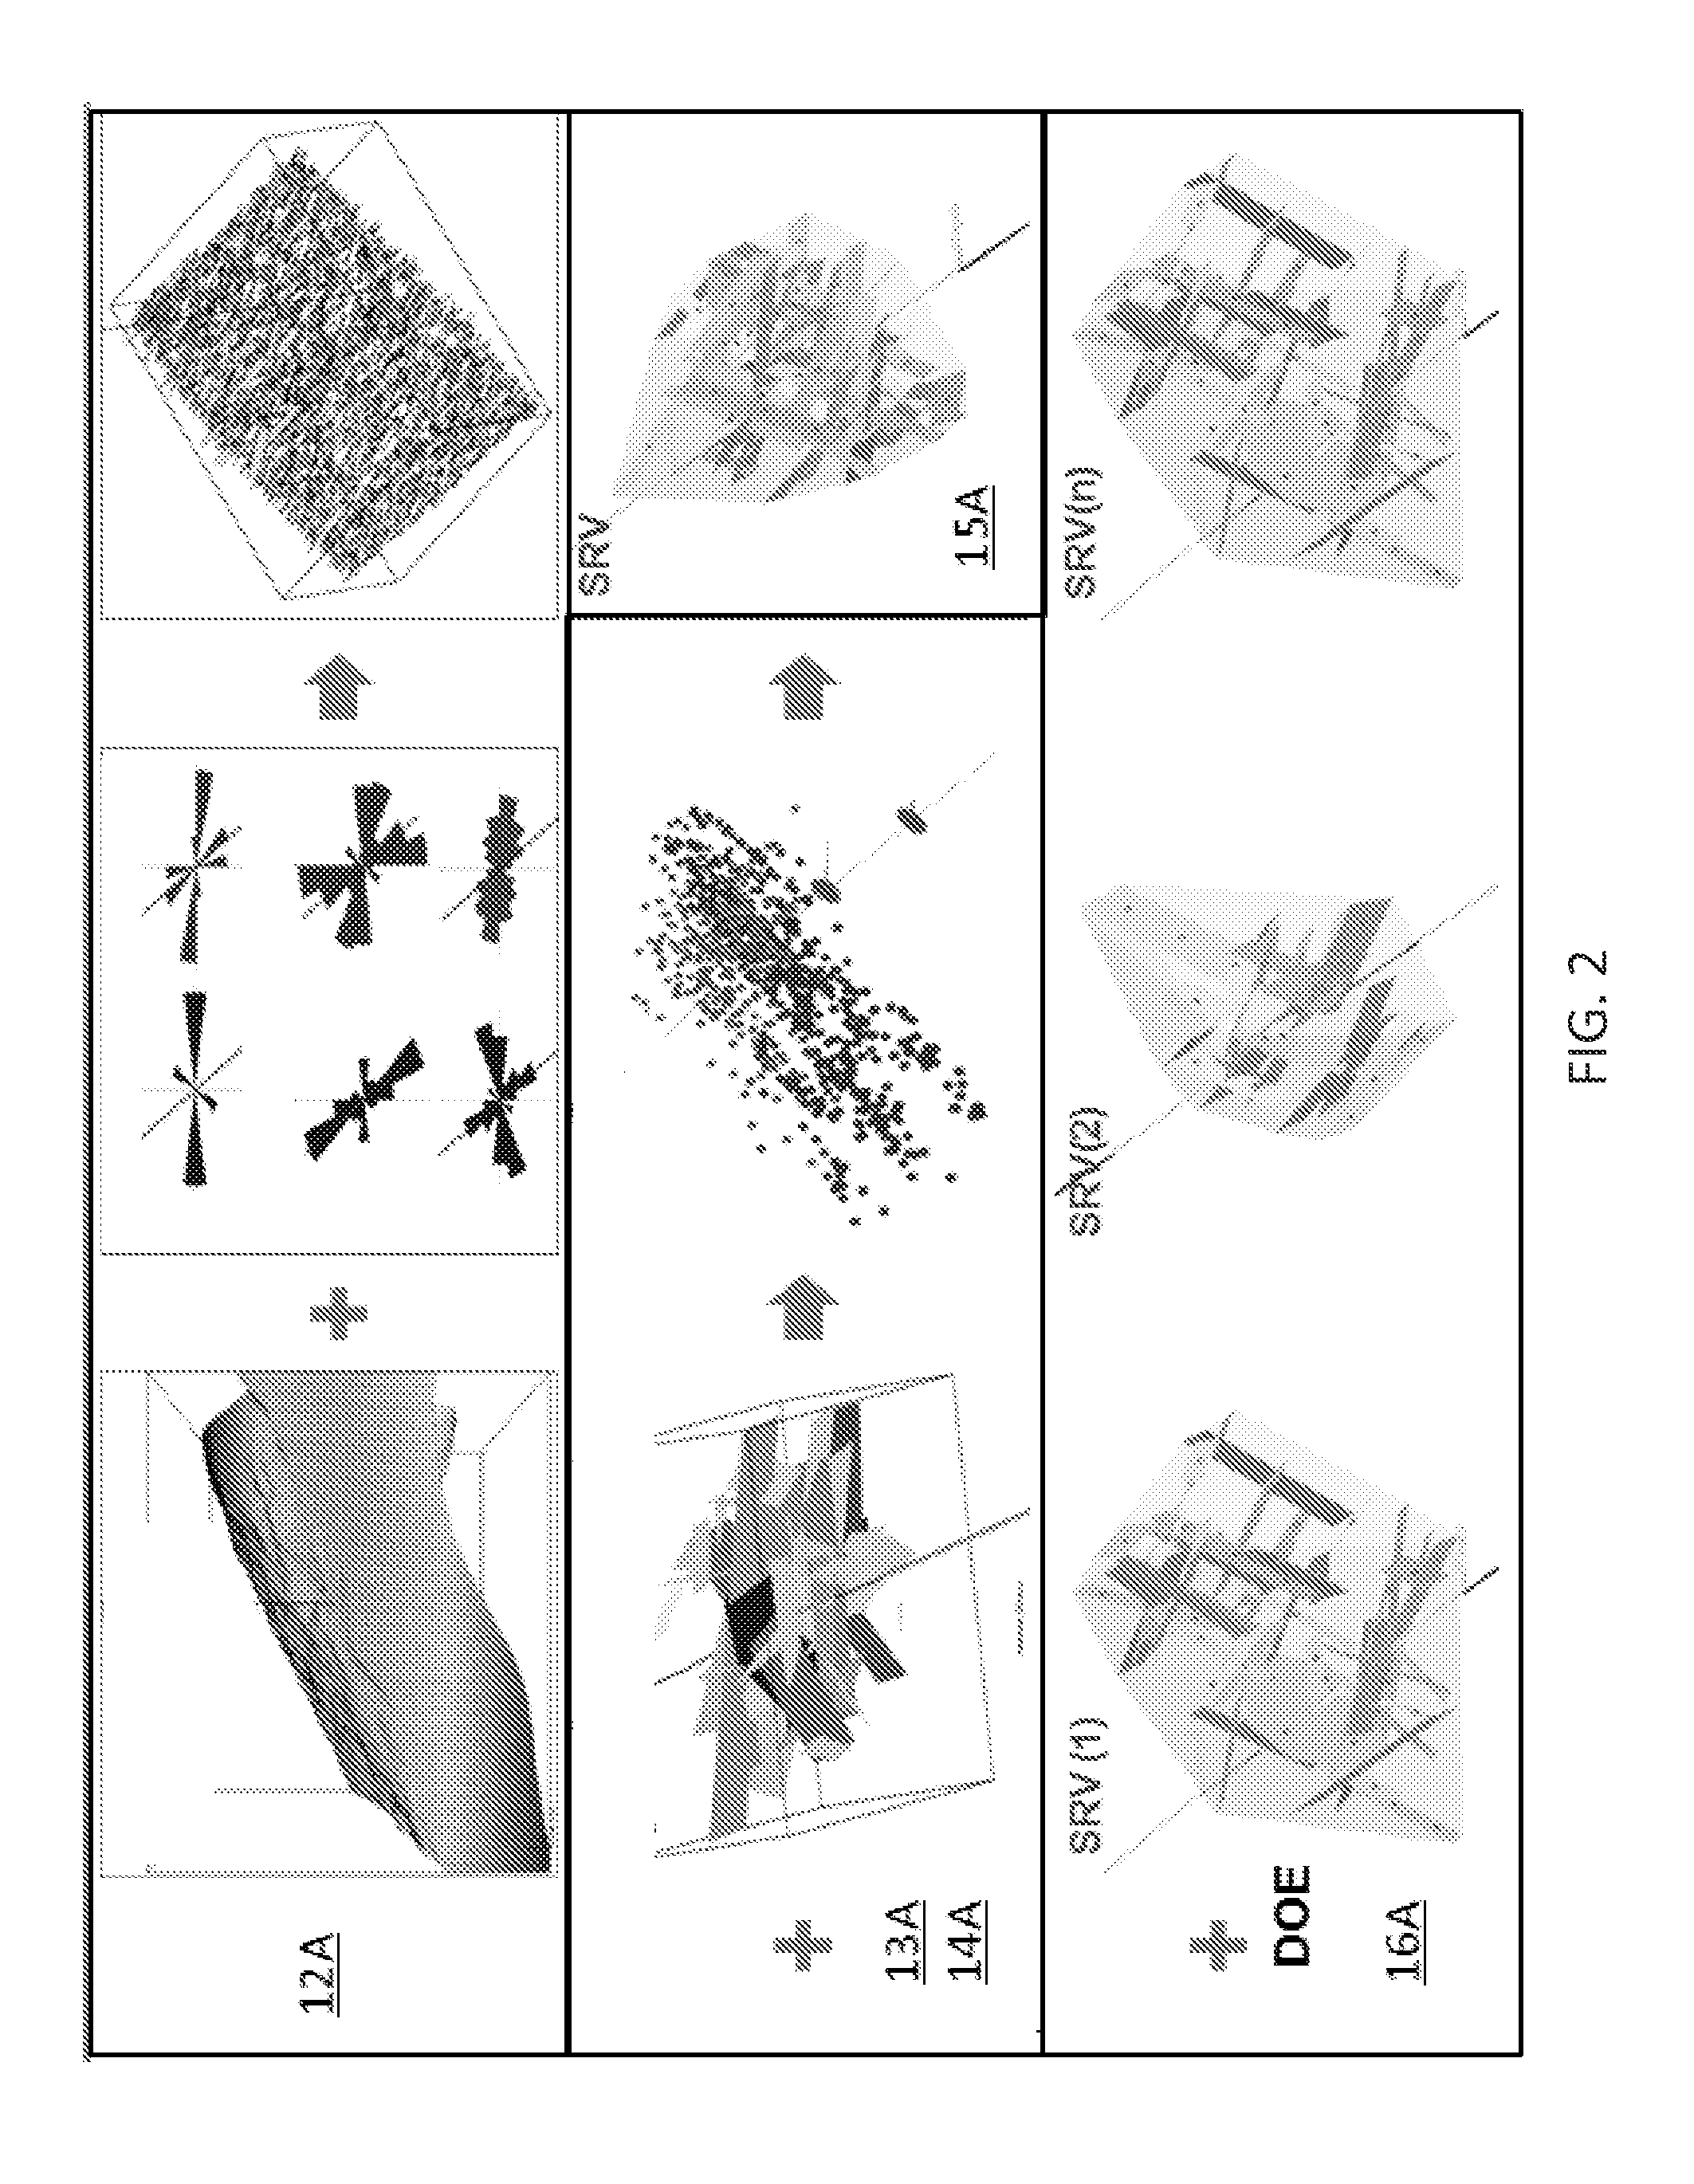 System and method for characterizing uncertainty in subterranean reservoir fracture networks